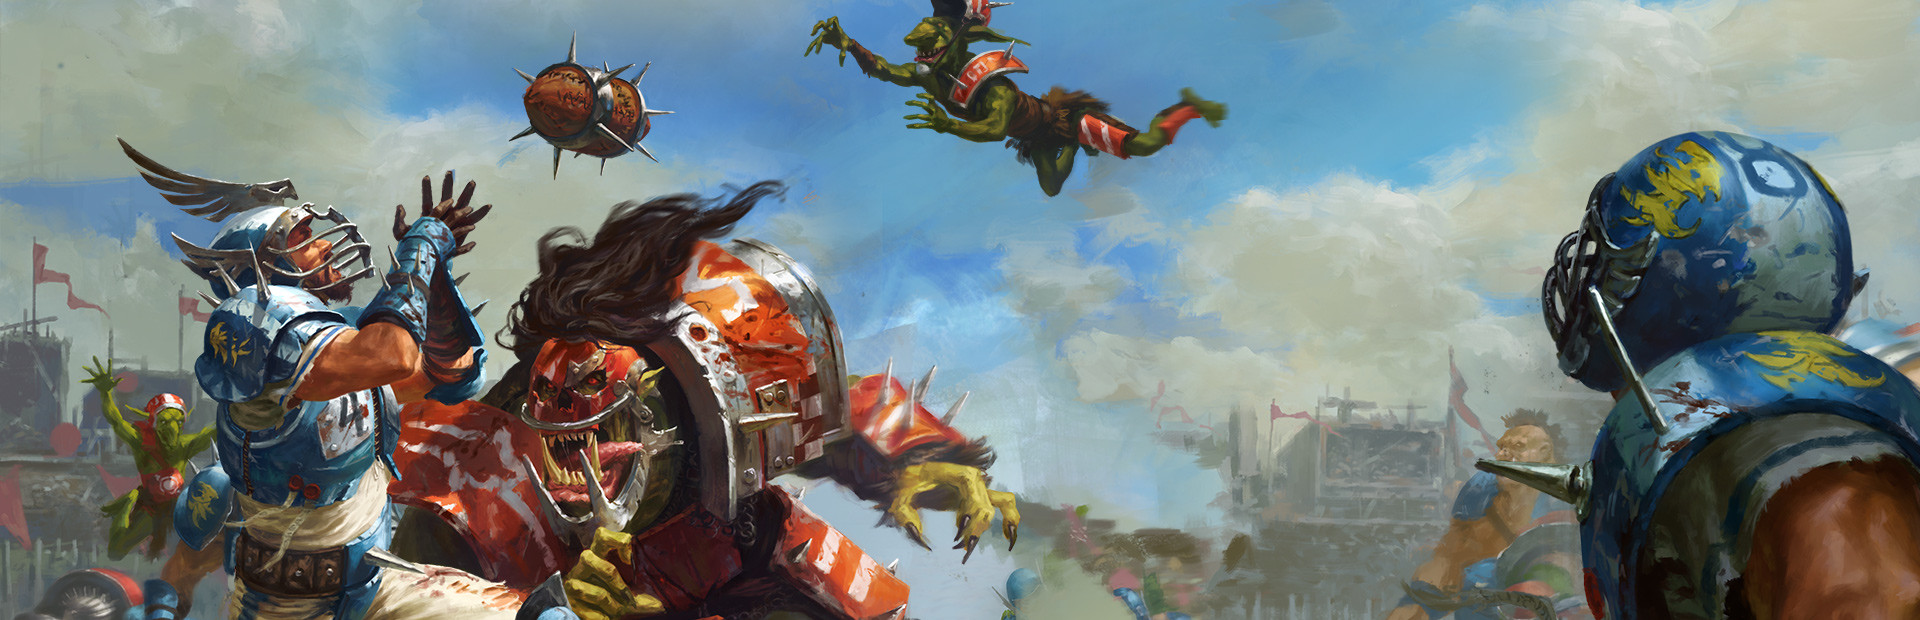 Blood Bowl - Legendary Edition cover image